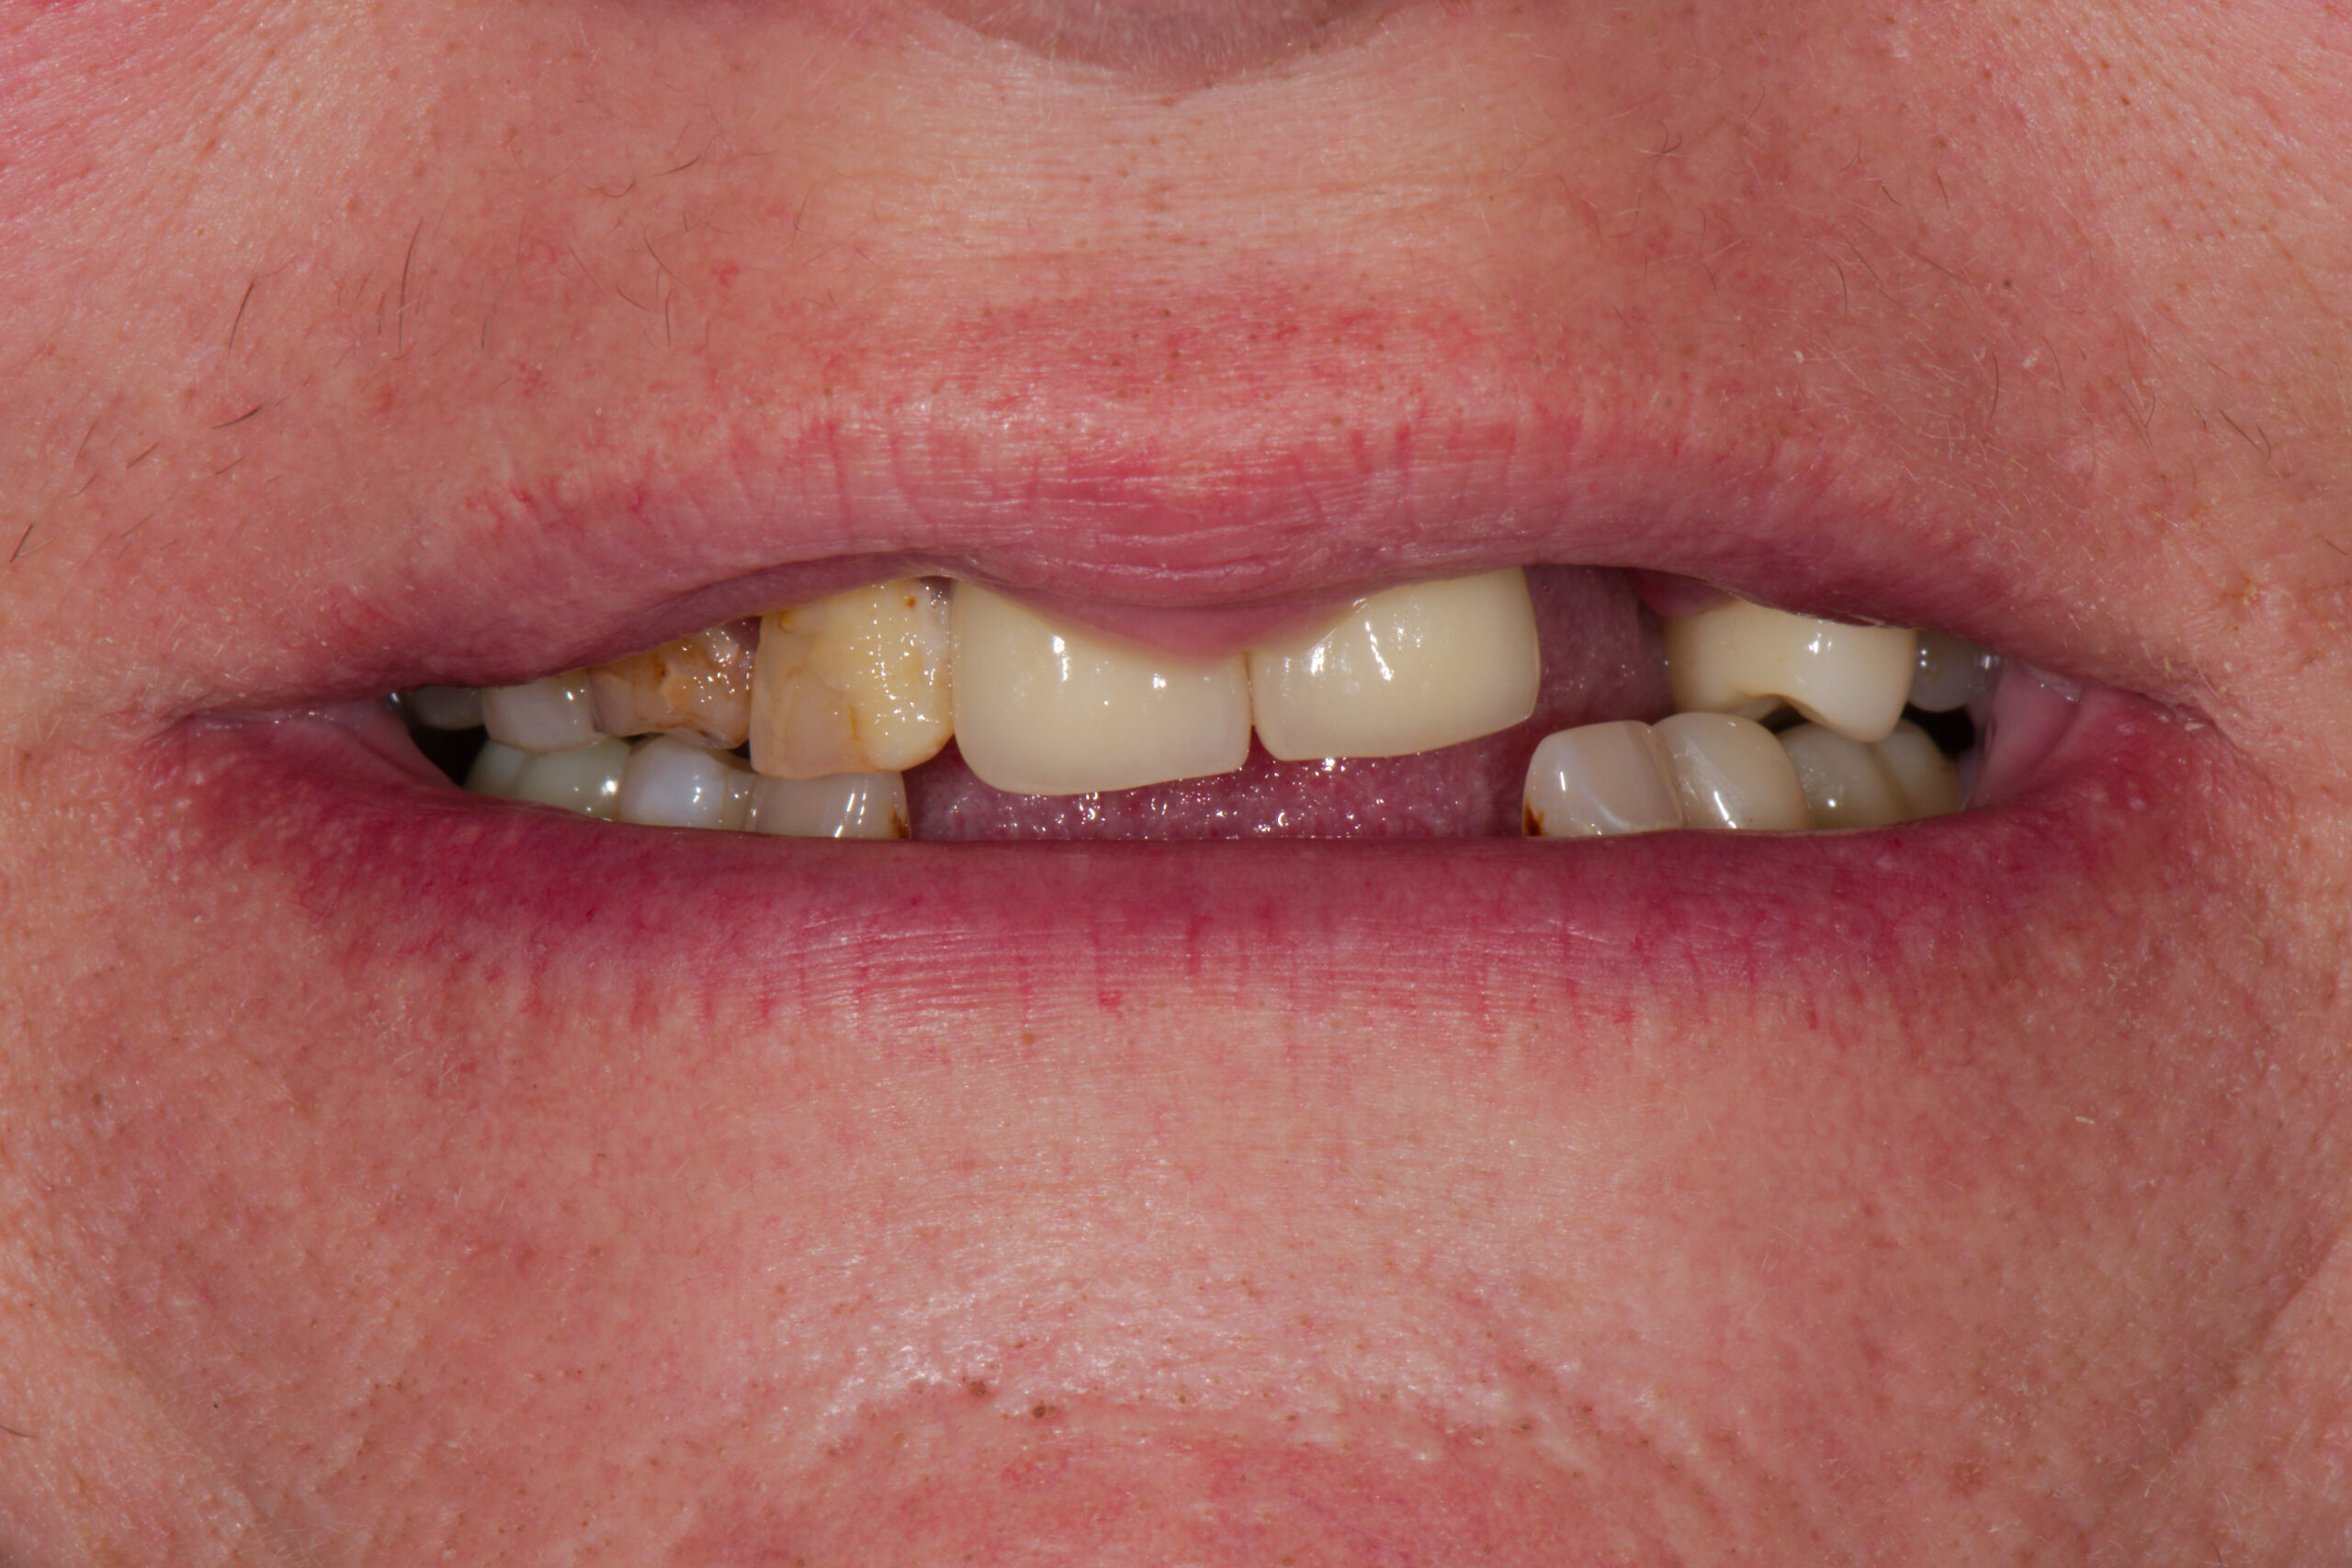 before: upper conventional denture, lower implant supported denture, Z Dentistry, Roanoke, TX